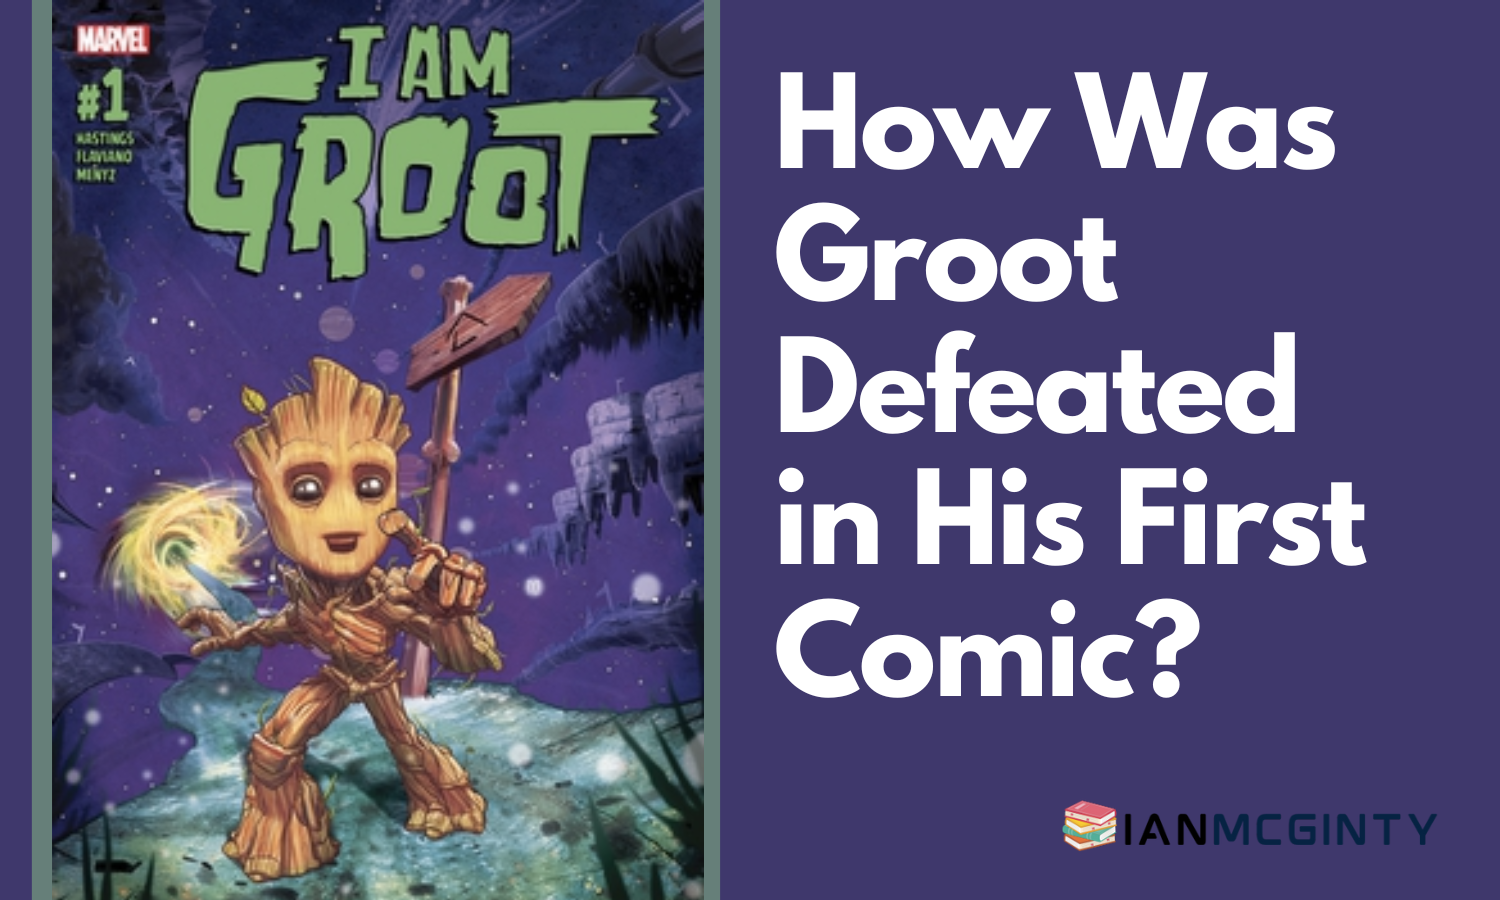 How Was Groot Defeated in His First Comic?